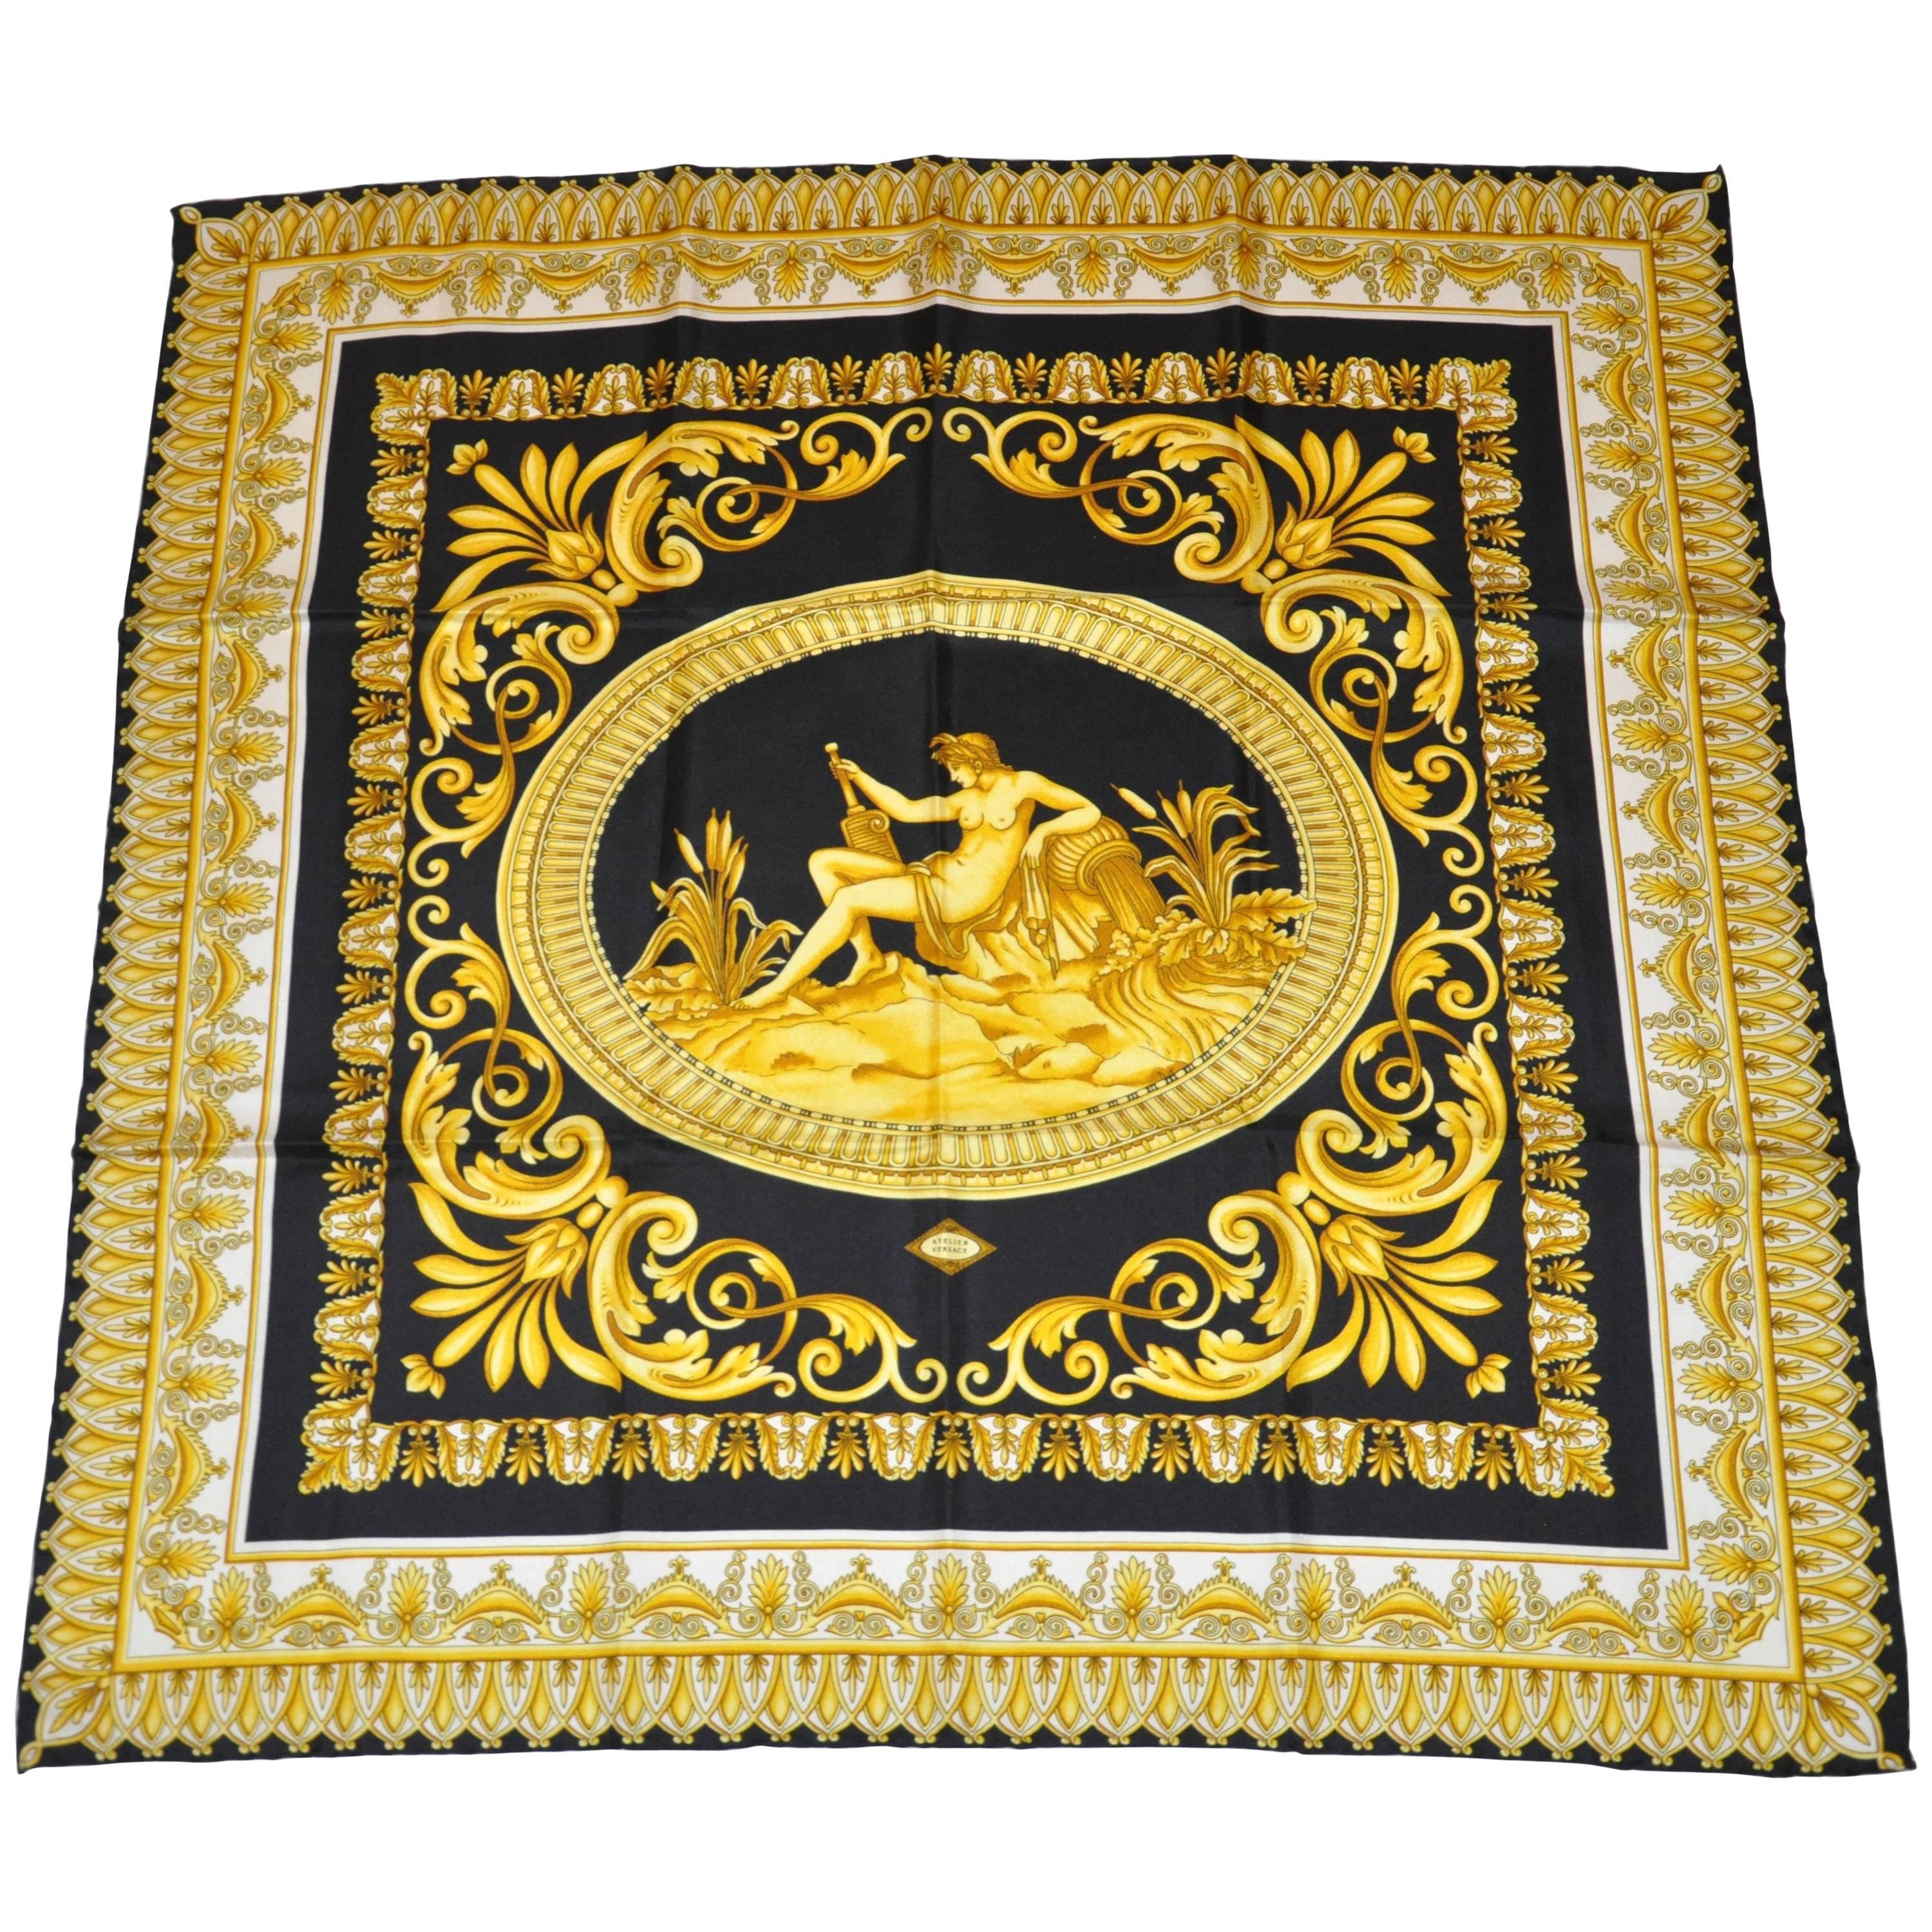 Gianni Versace Signature "House of Versace" Shades of Gold & Black Silk Jacquard